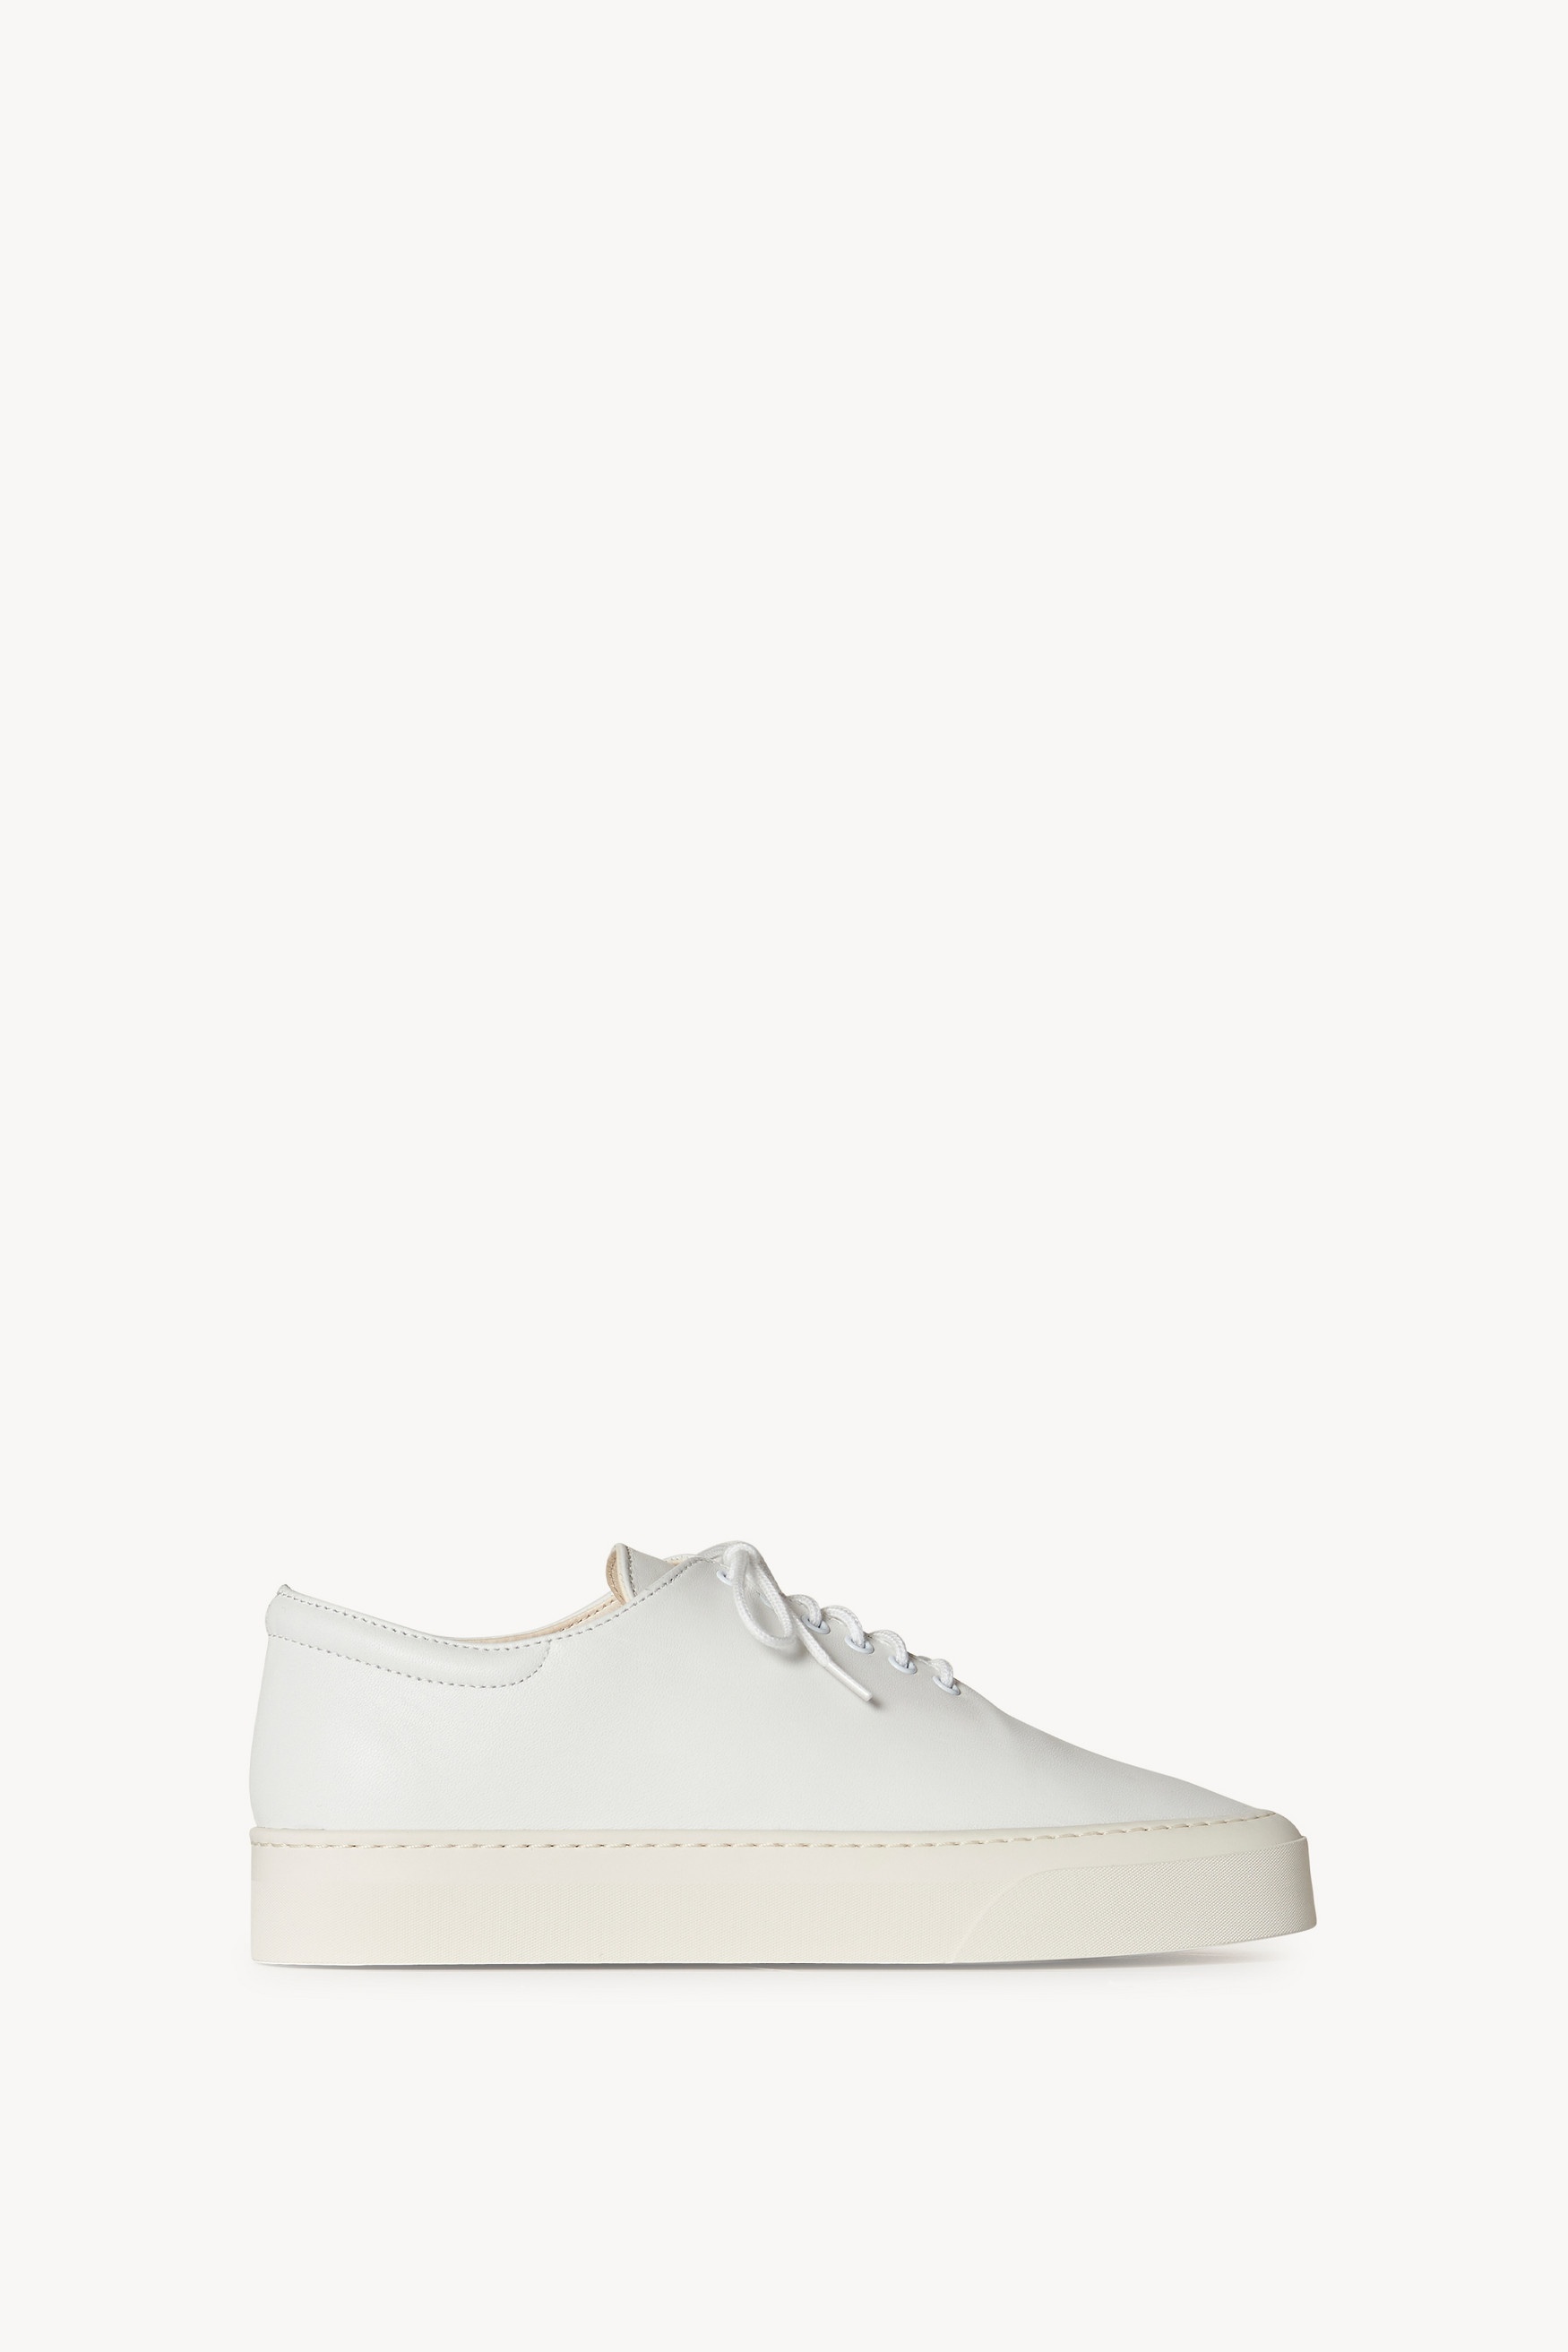 Marie H Lace-Up Sneaker in Leather - 1